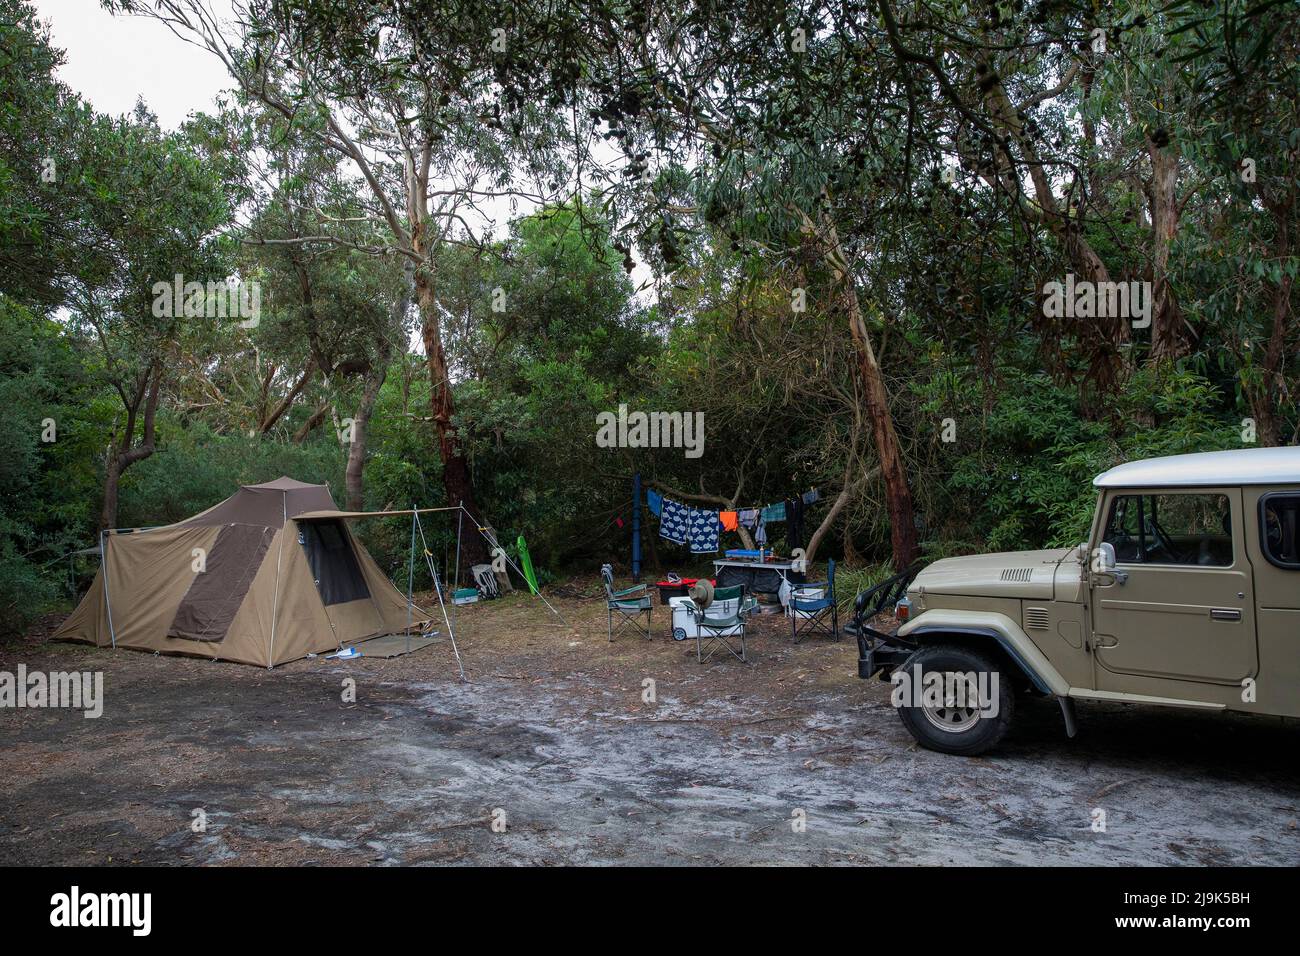 SUV parked outside tent at campground among trees, Wilsons Prom, Victoria, Australia Stock Photo